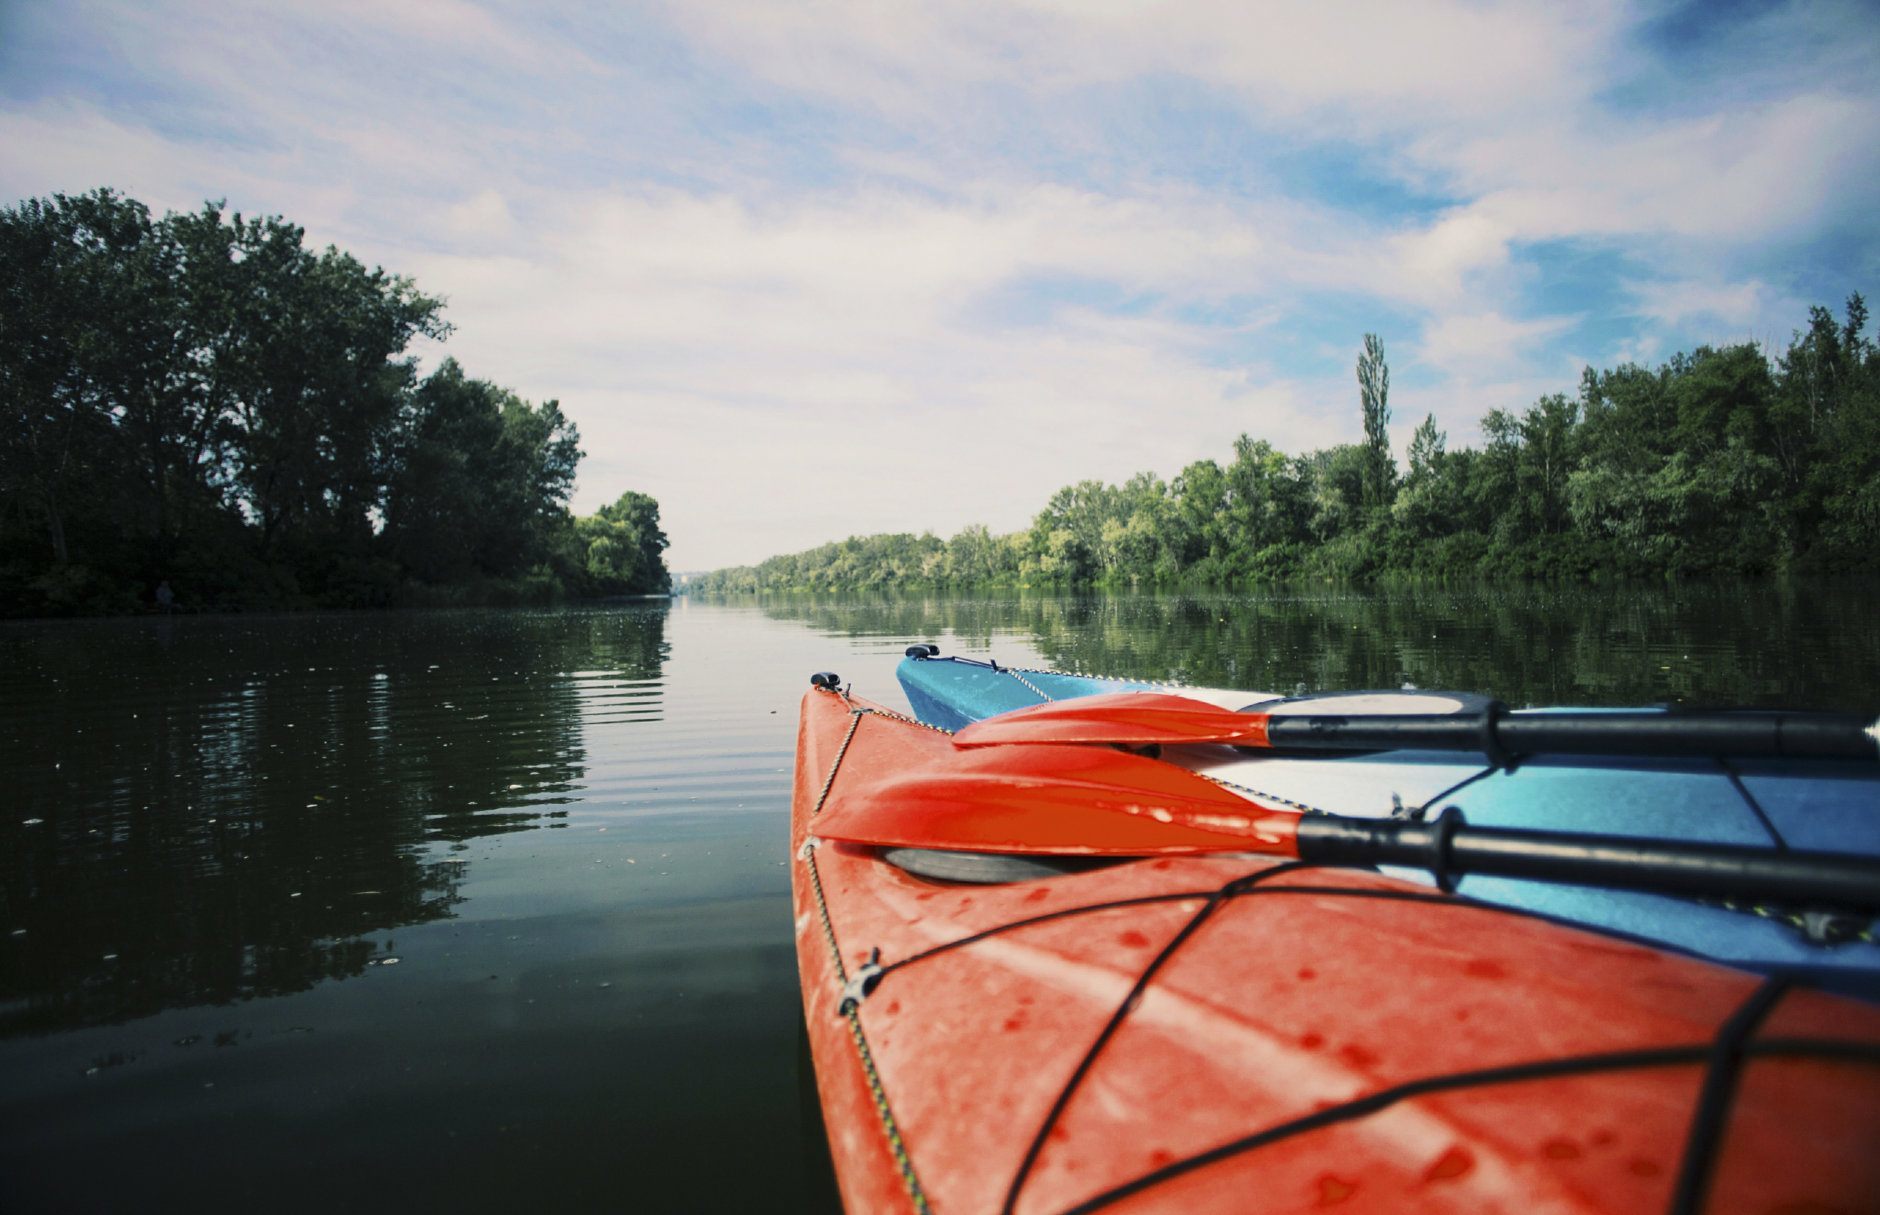 Kayaking on the Lake Concept Photo. (Getty Images/iStockphoto)